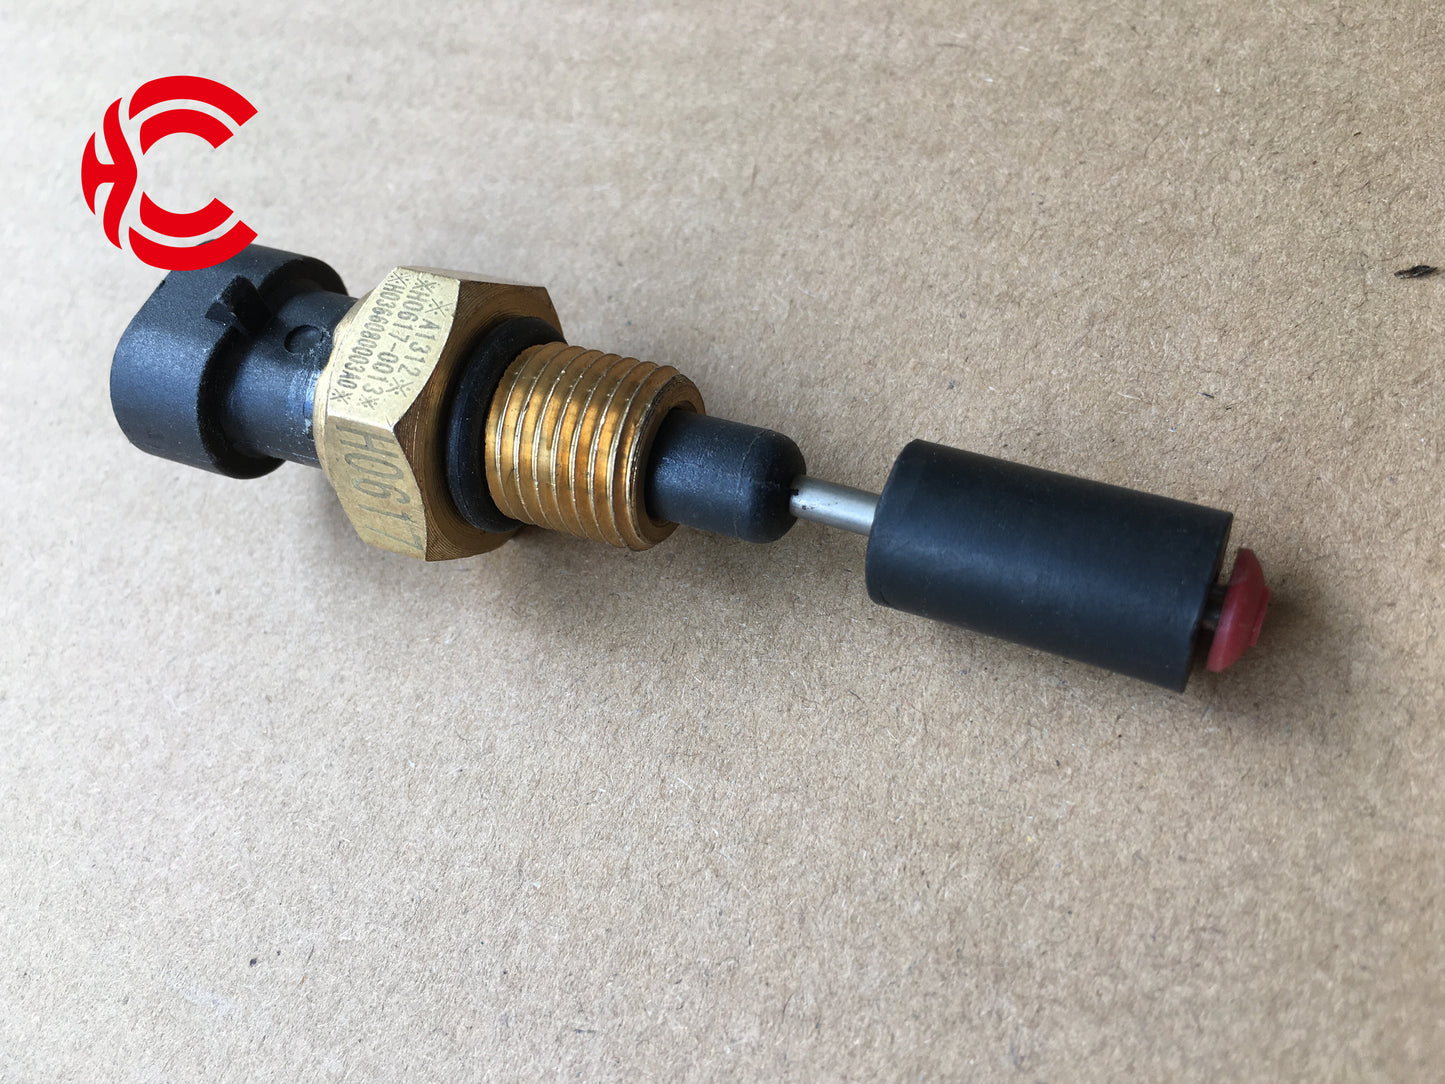 OEM: H0366080003A FOTON AUMANMaterial: ABS metalColor: Black GoldenOrigin: Made in ChinaWeight: 50gPacking List: 1* Coolant Level Alarm Sensor More ServiceWe can provide OEM Manufacturing serviceWe can Be your one-step solution for Auto PartsWe can provide technical scheme for you Feel Free to Contact Us, we will get back to you as soon as possible.